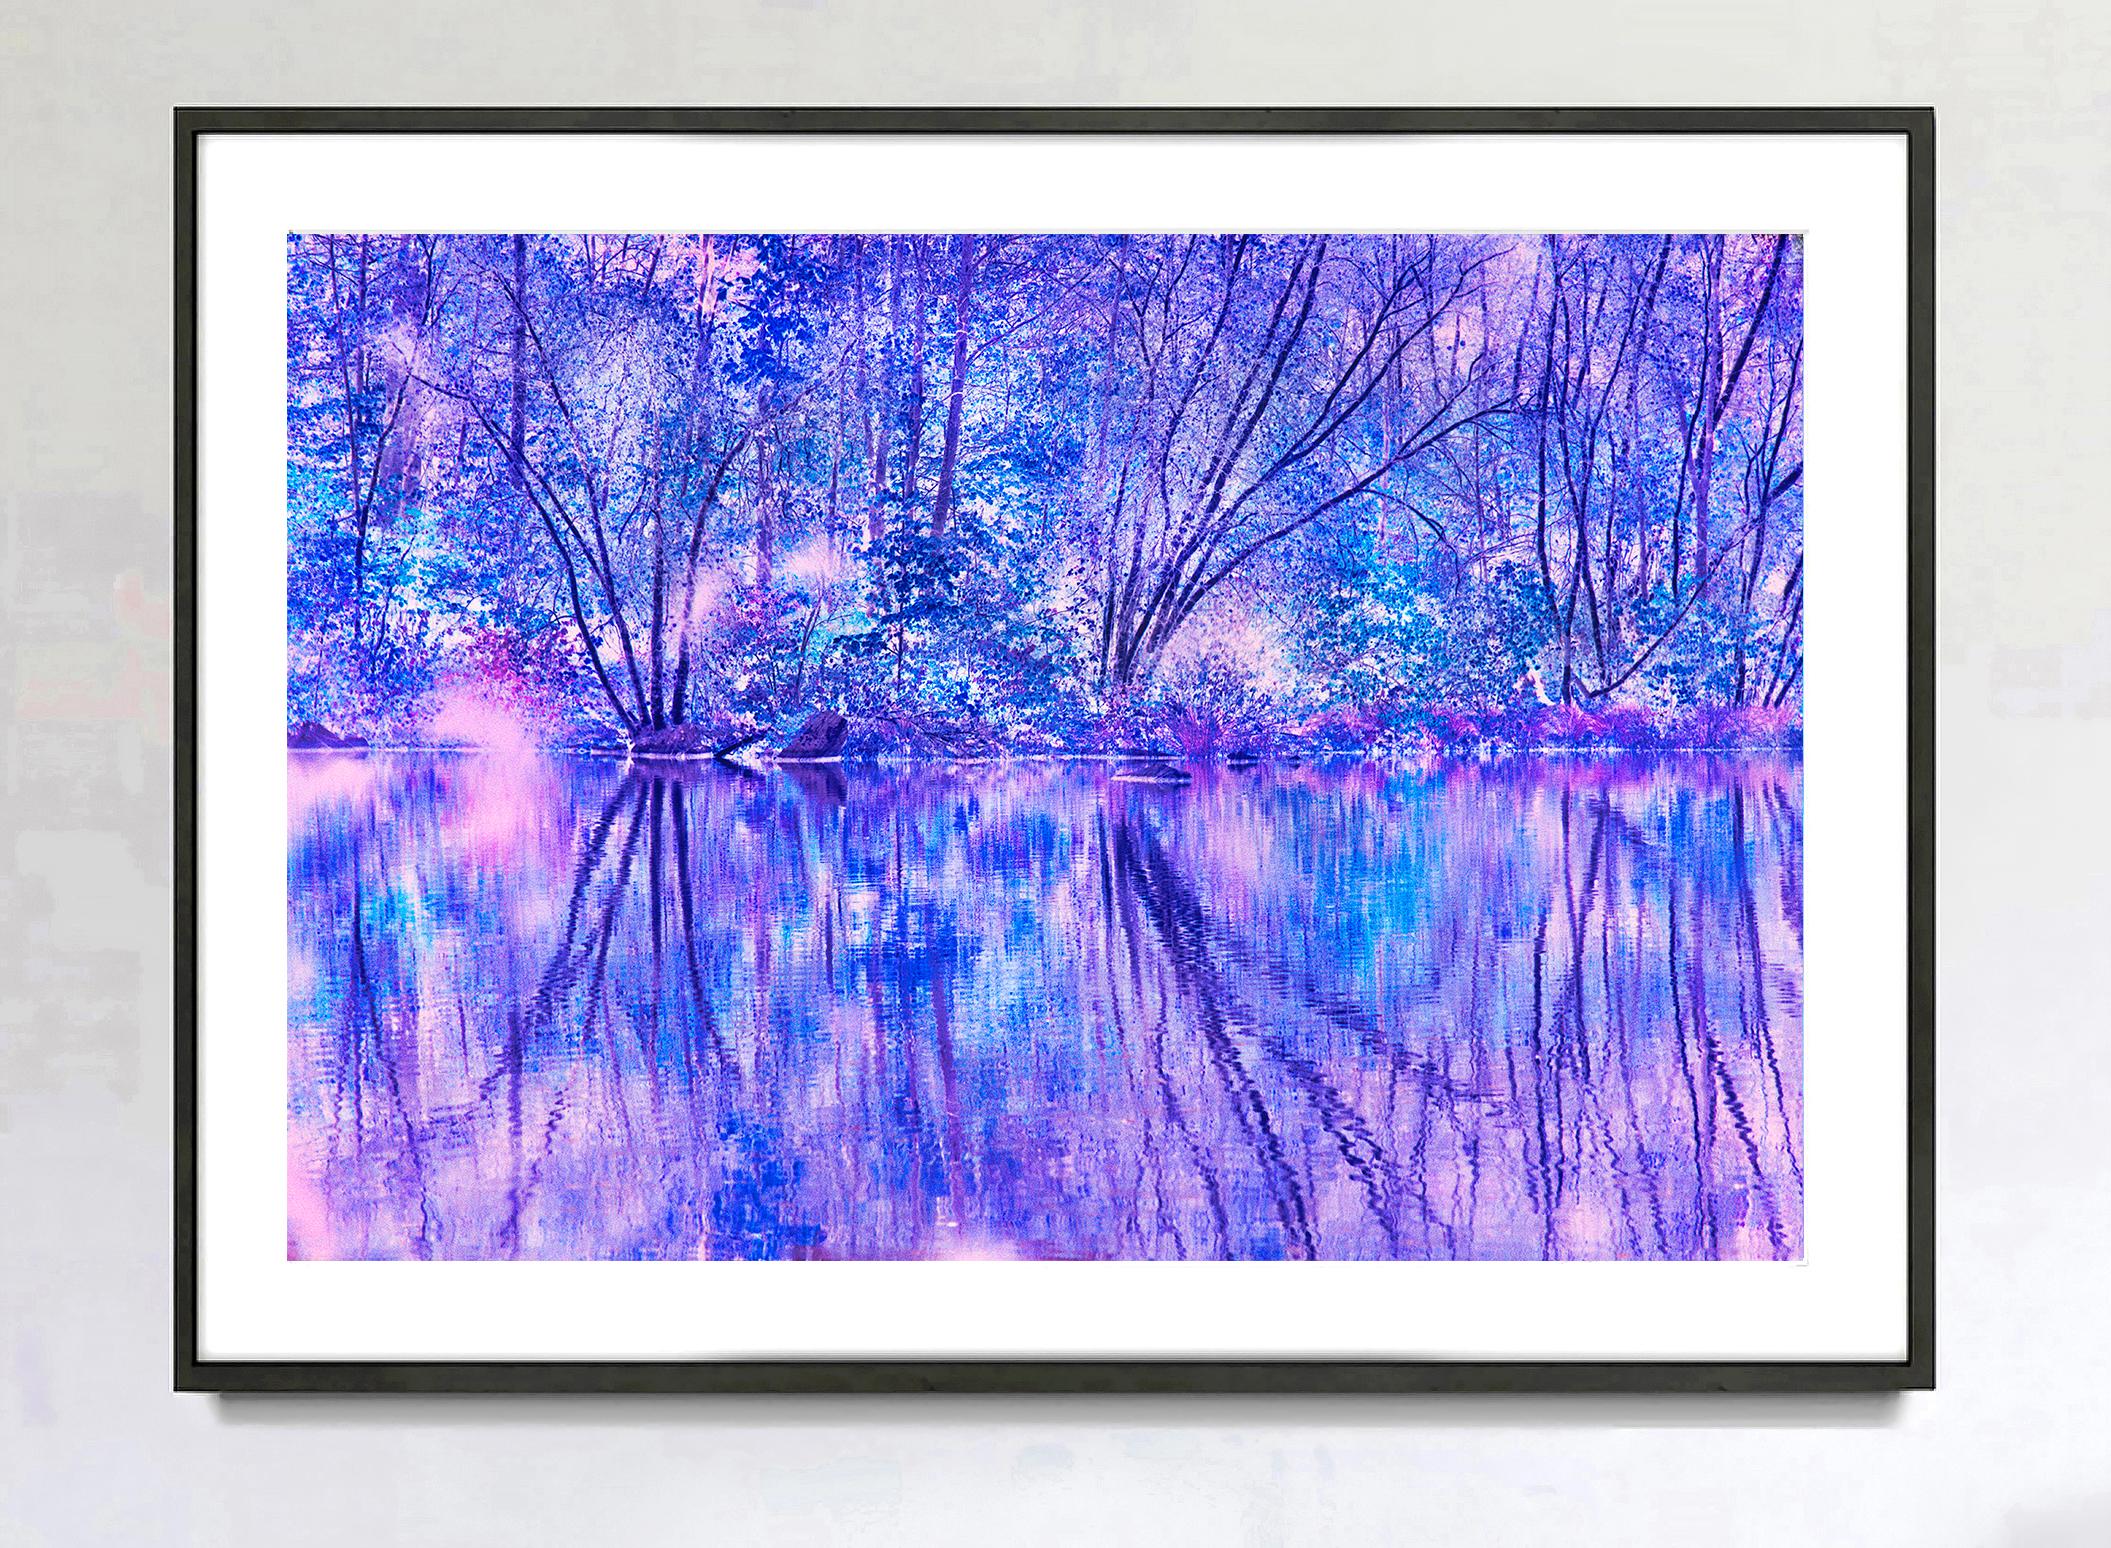 Surreal Impressionist Landscape in Lavender - Photograph by Mitchell Funk